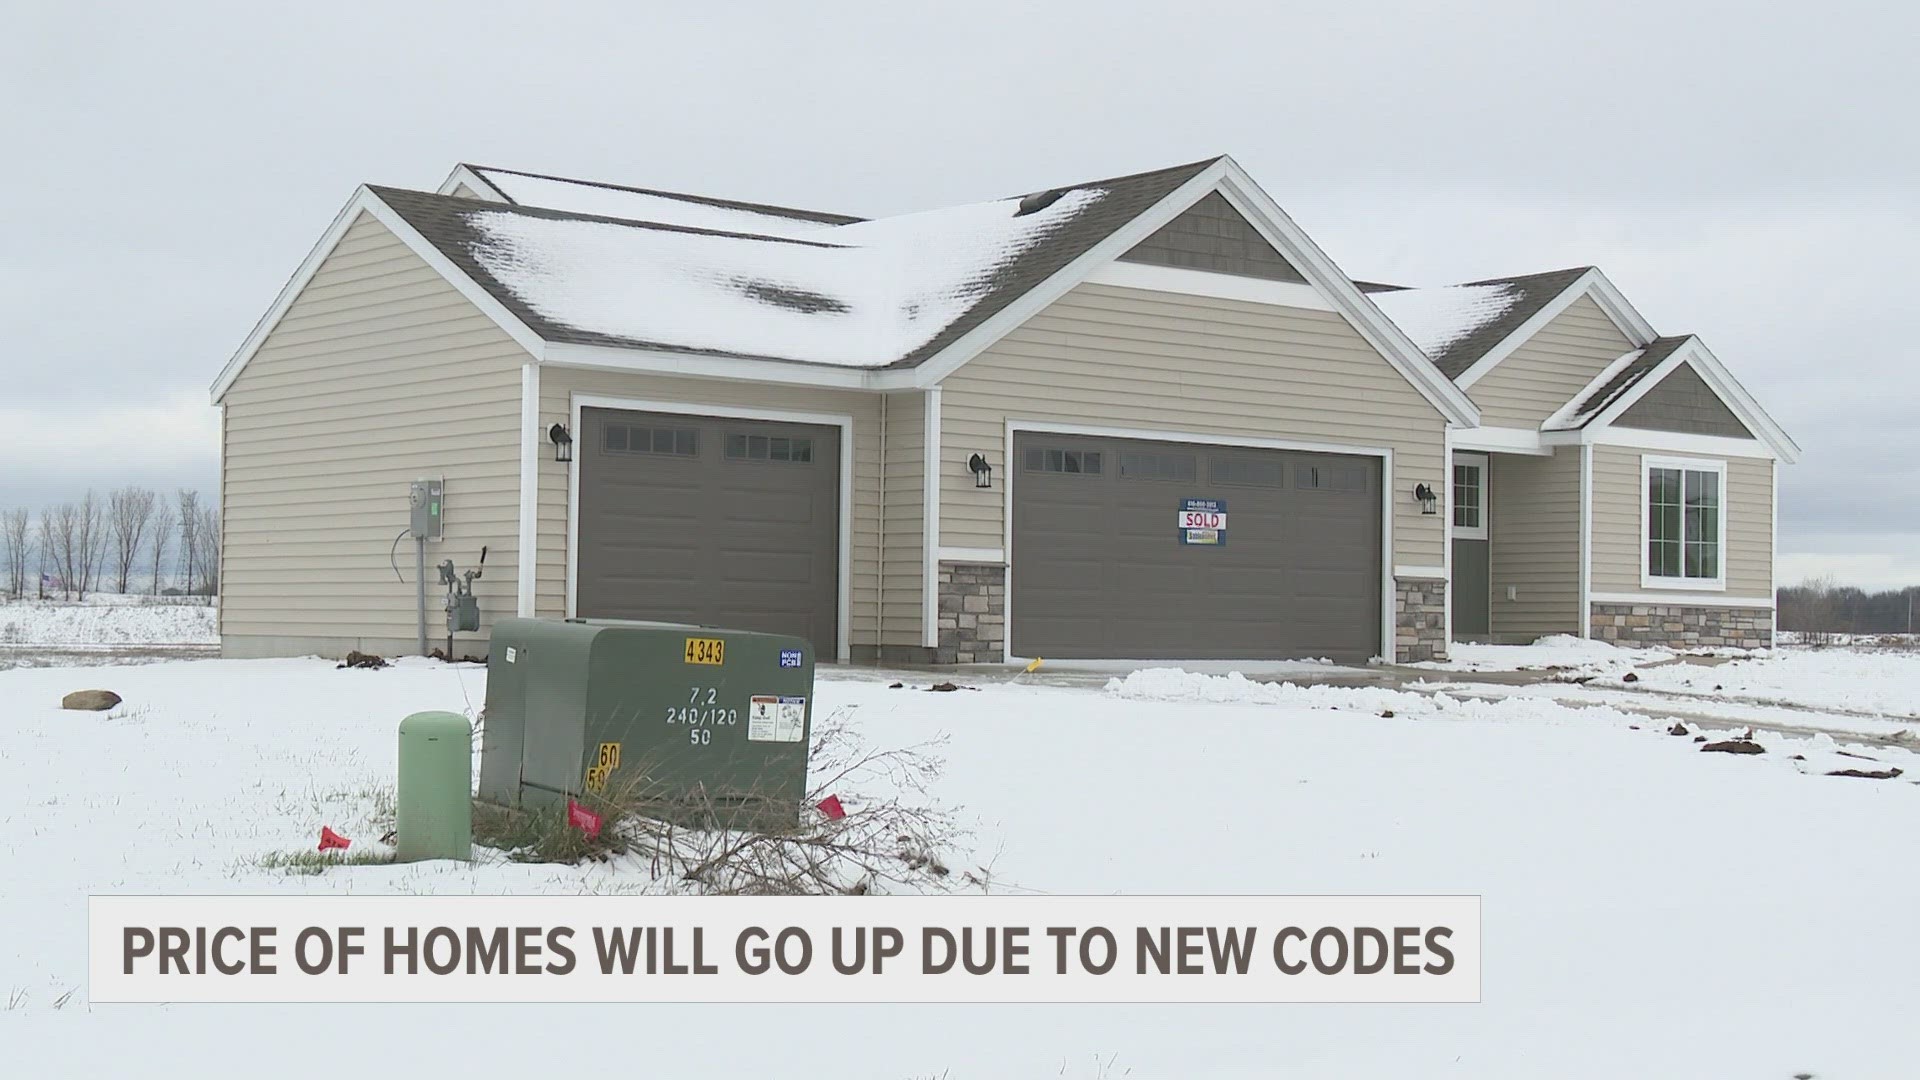 The state's licensing department is proposing new building codes for home builders.